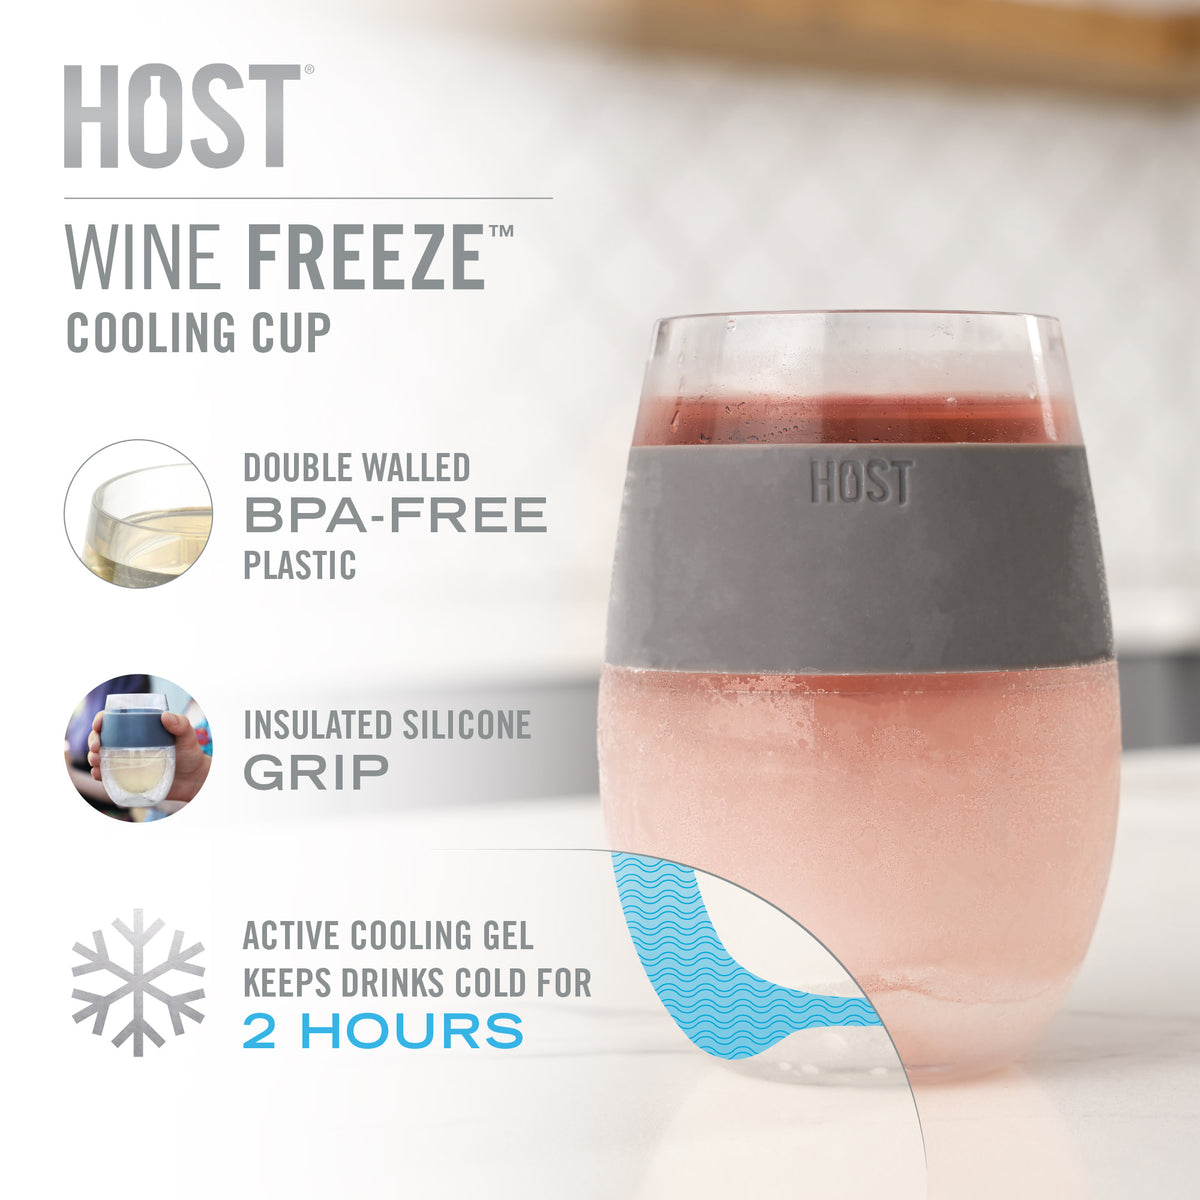 HOST Wine FREEZE XL Cooling Cups in Gray (set of 2), 1 Pack - Foods Co.